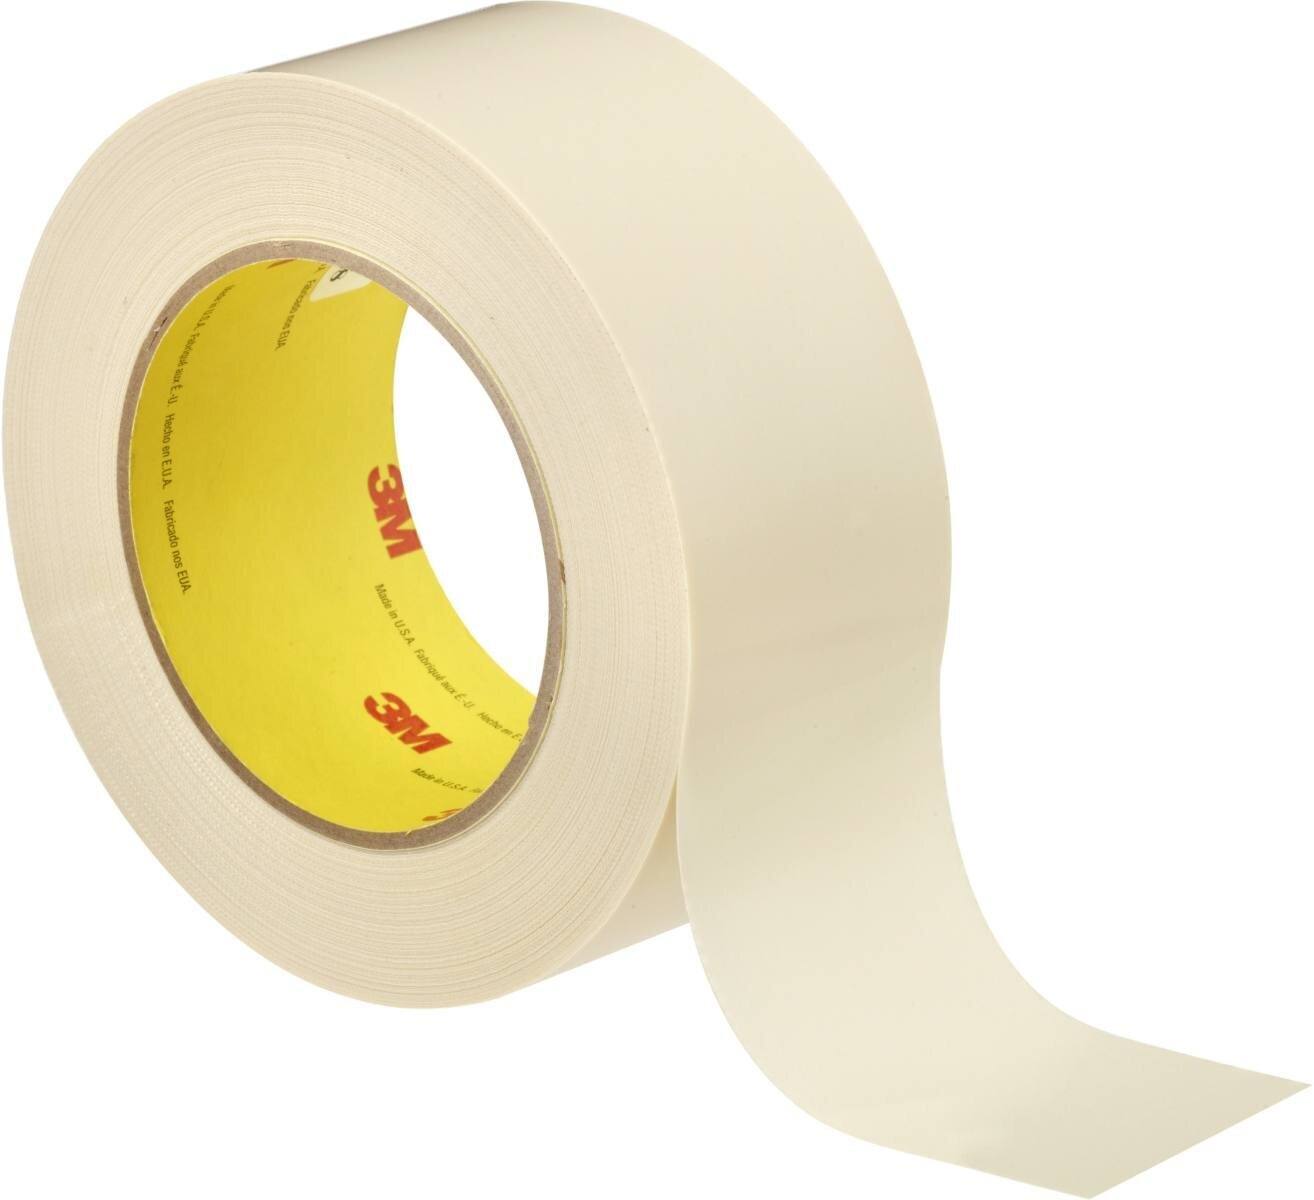 3M 5401 Traction Tape 75mmx33m